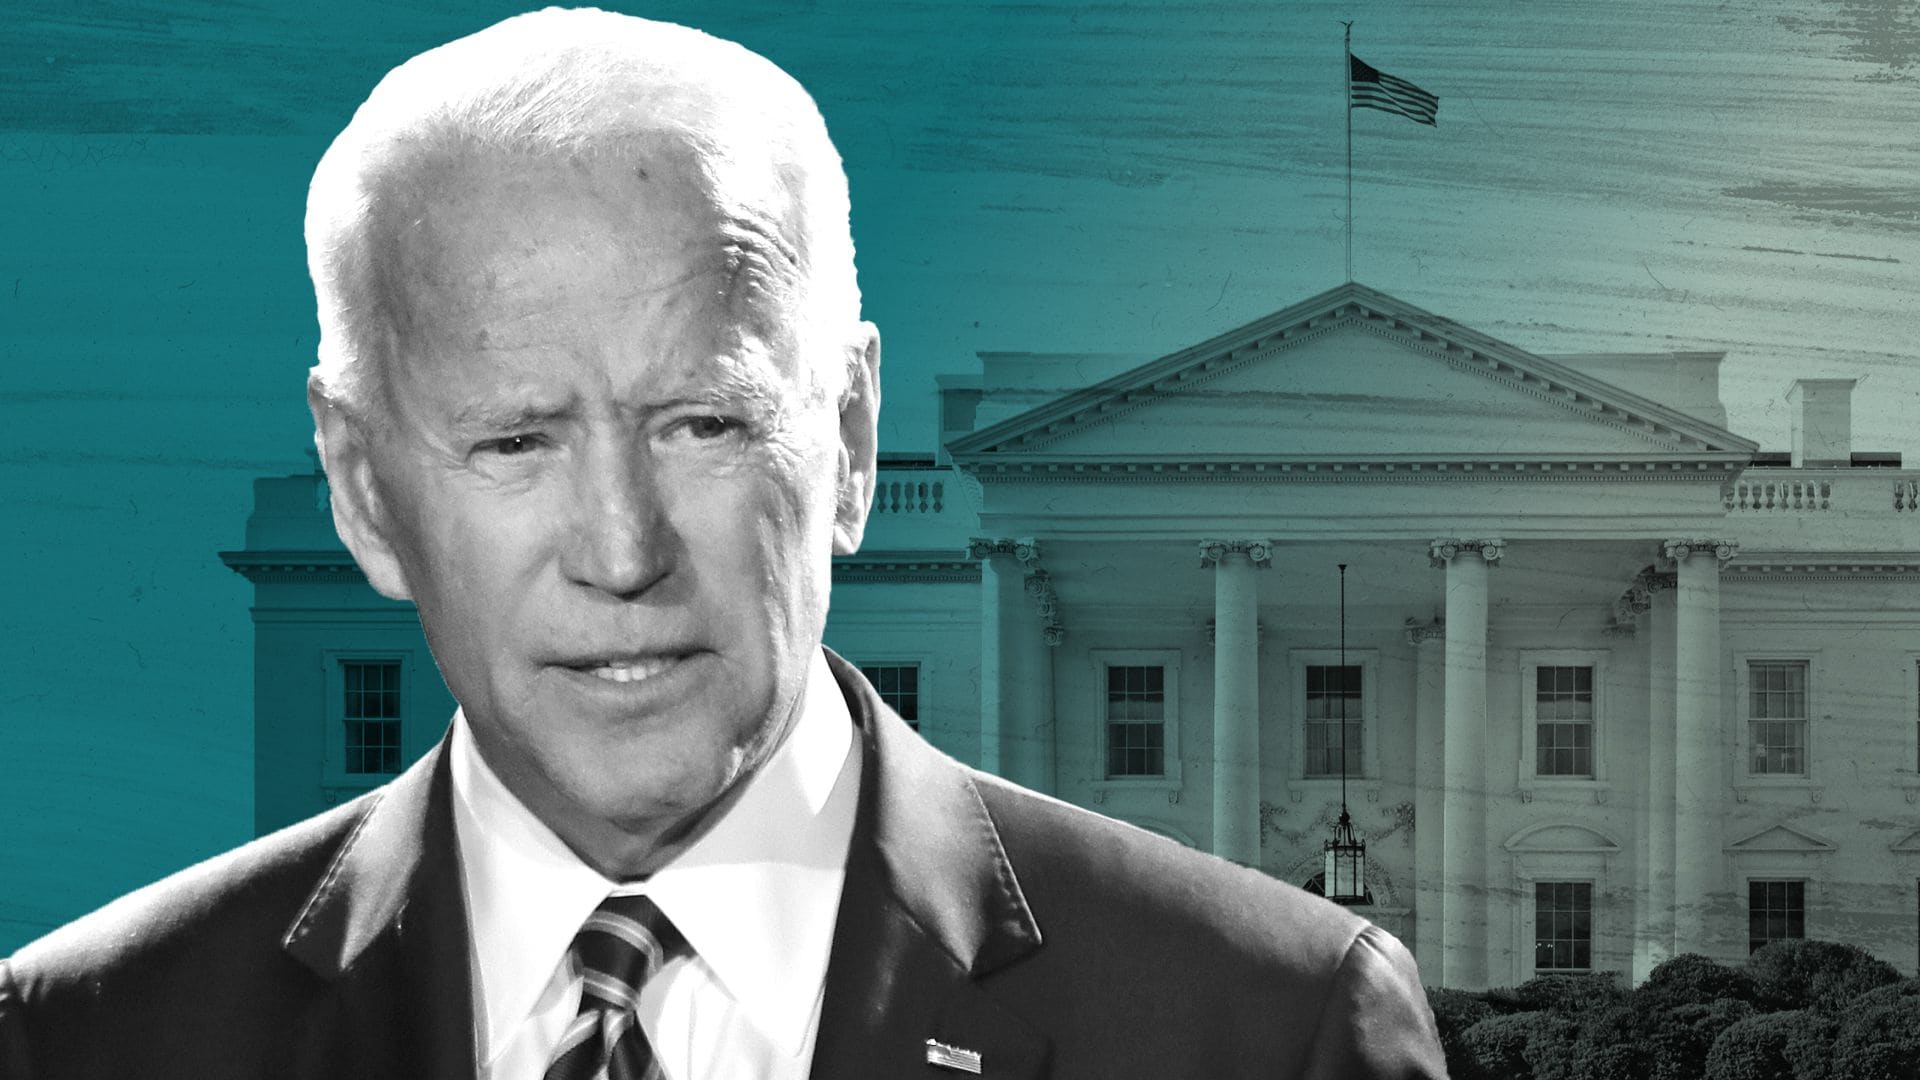 Joe Biden could be the best bet to beat Trump. But he might not